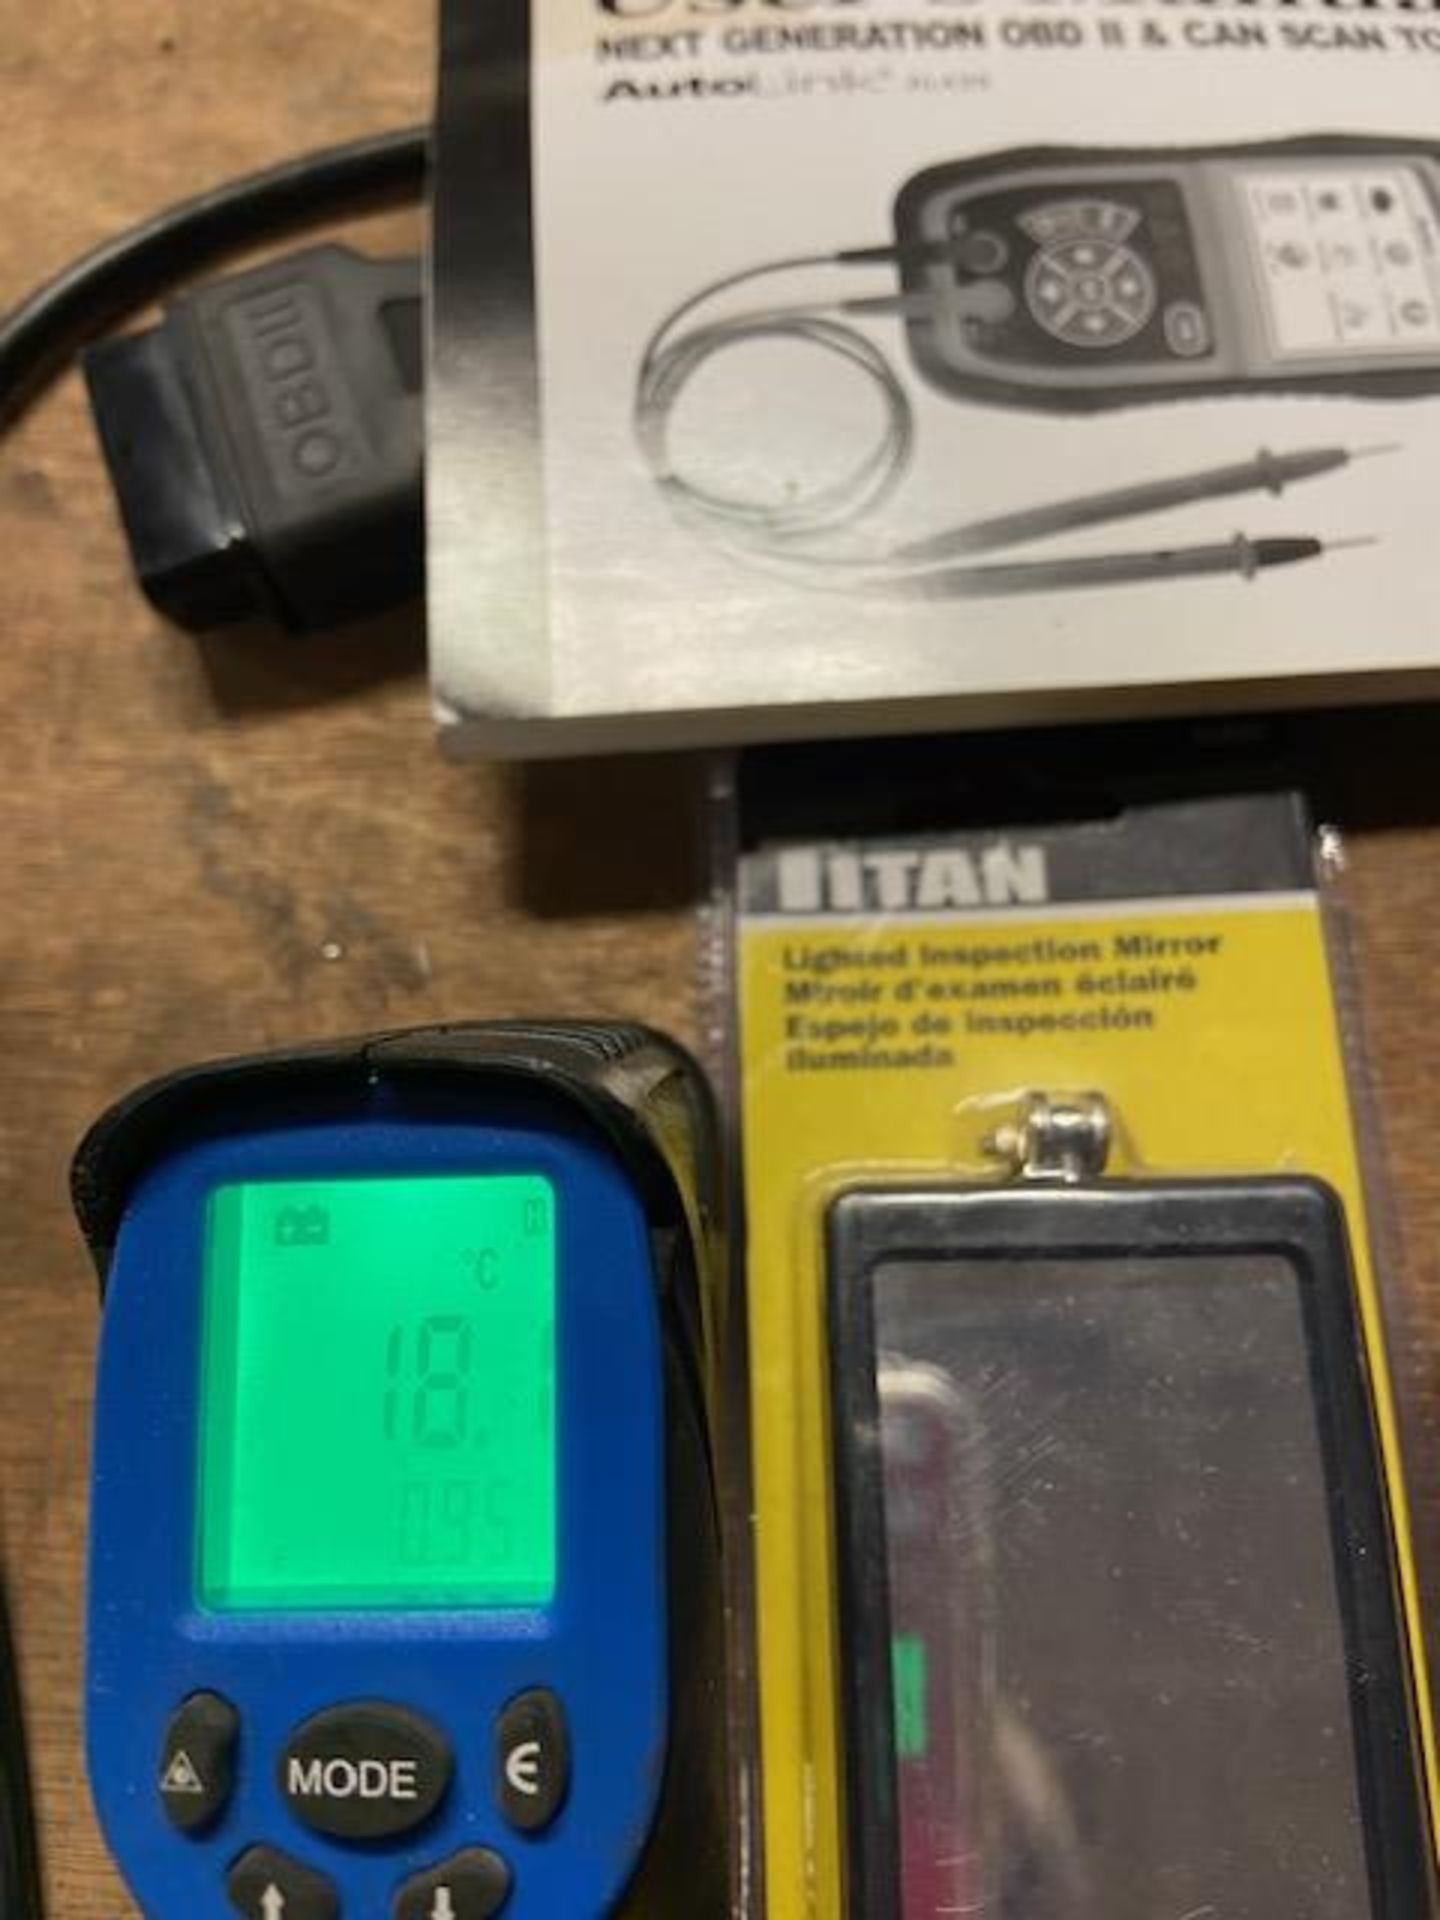 Lot of 3 (3 units) Digital Scanner Units Autolink - digital thermometer and more - Image 2 of 2